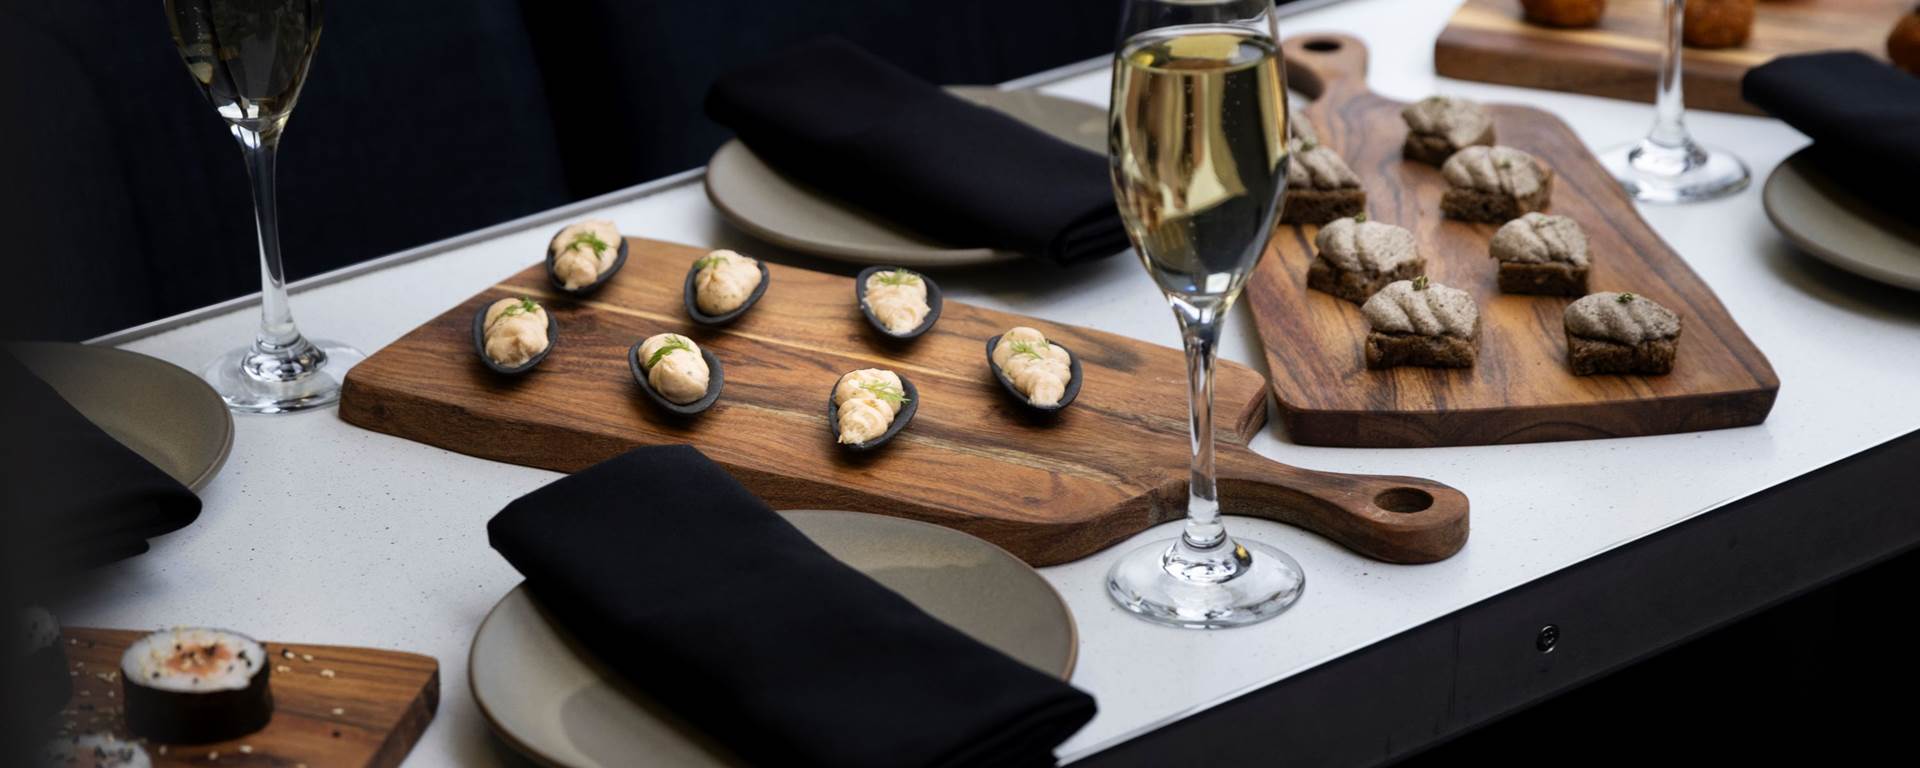 A table of canapes and champagne glasses